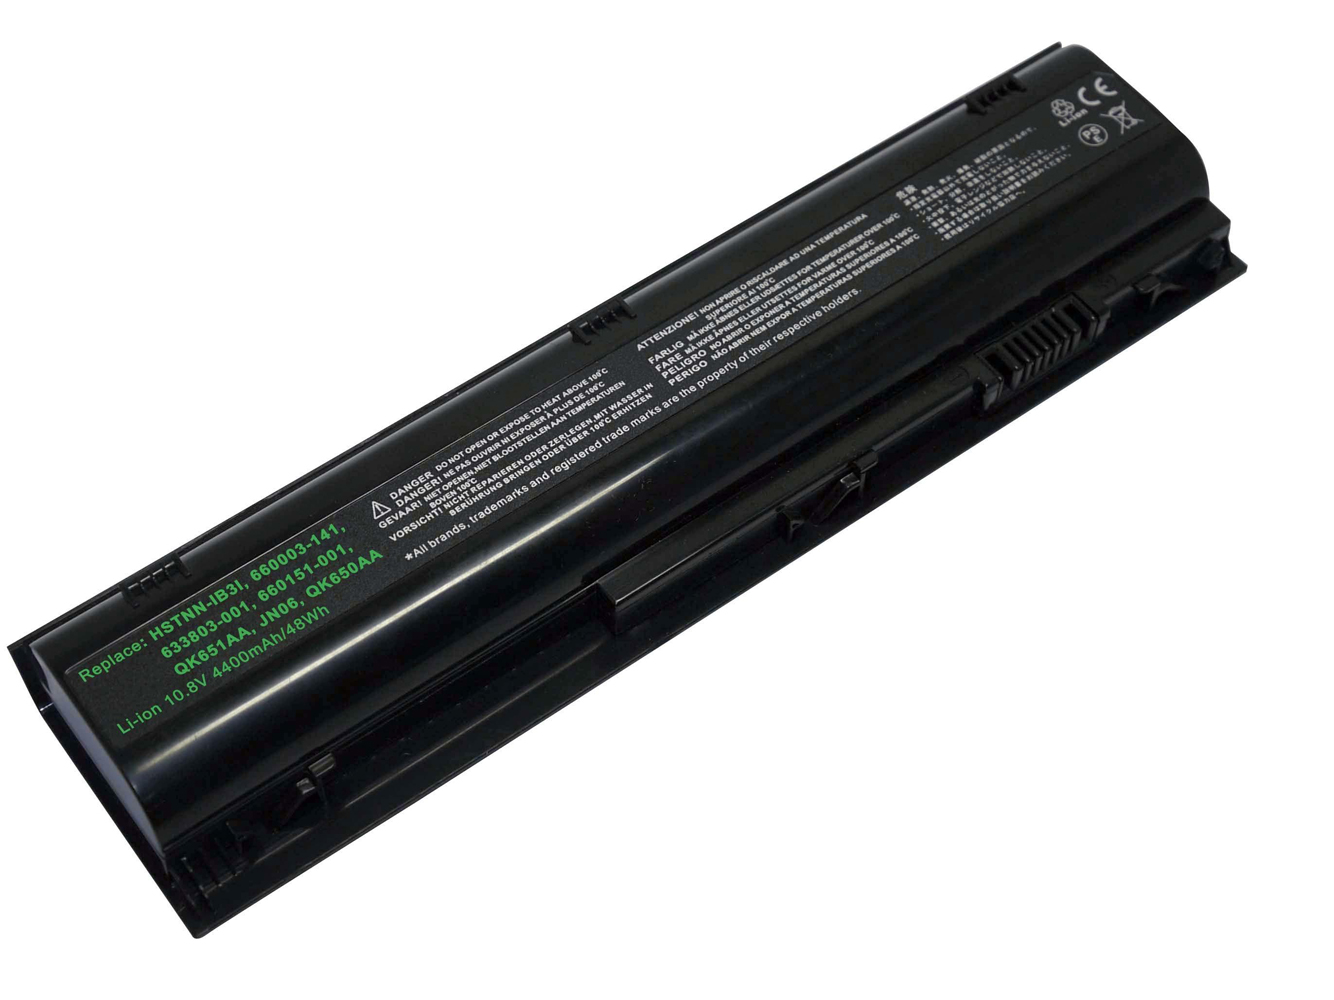 Hp 633803-001, 660003-141 Laptop Batteries For Hp Probook 4230s replacement